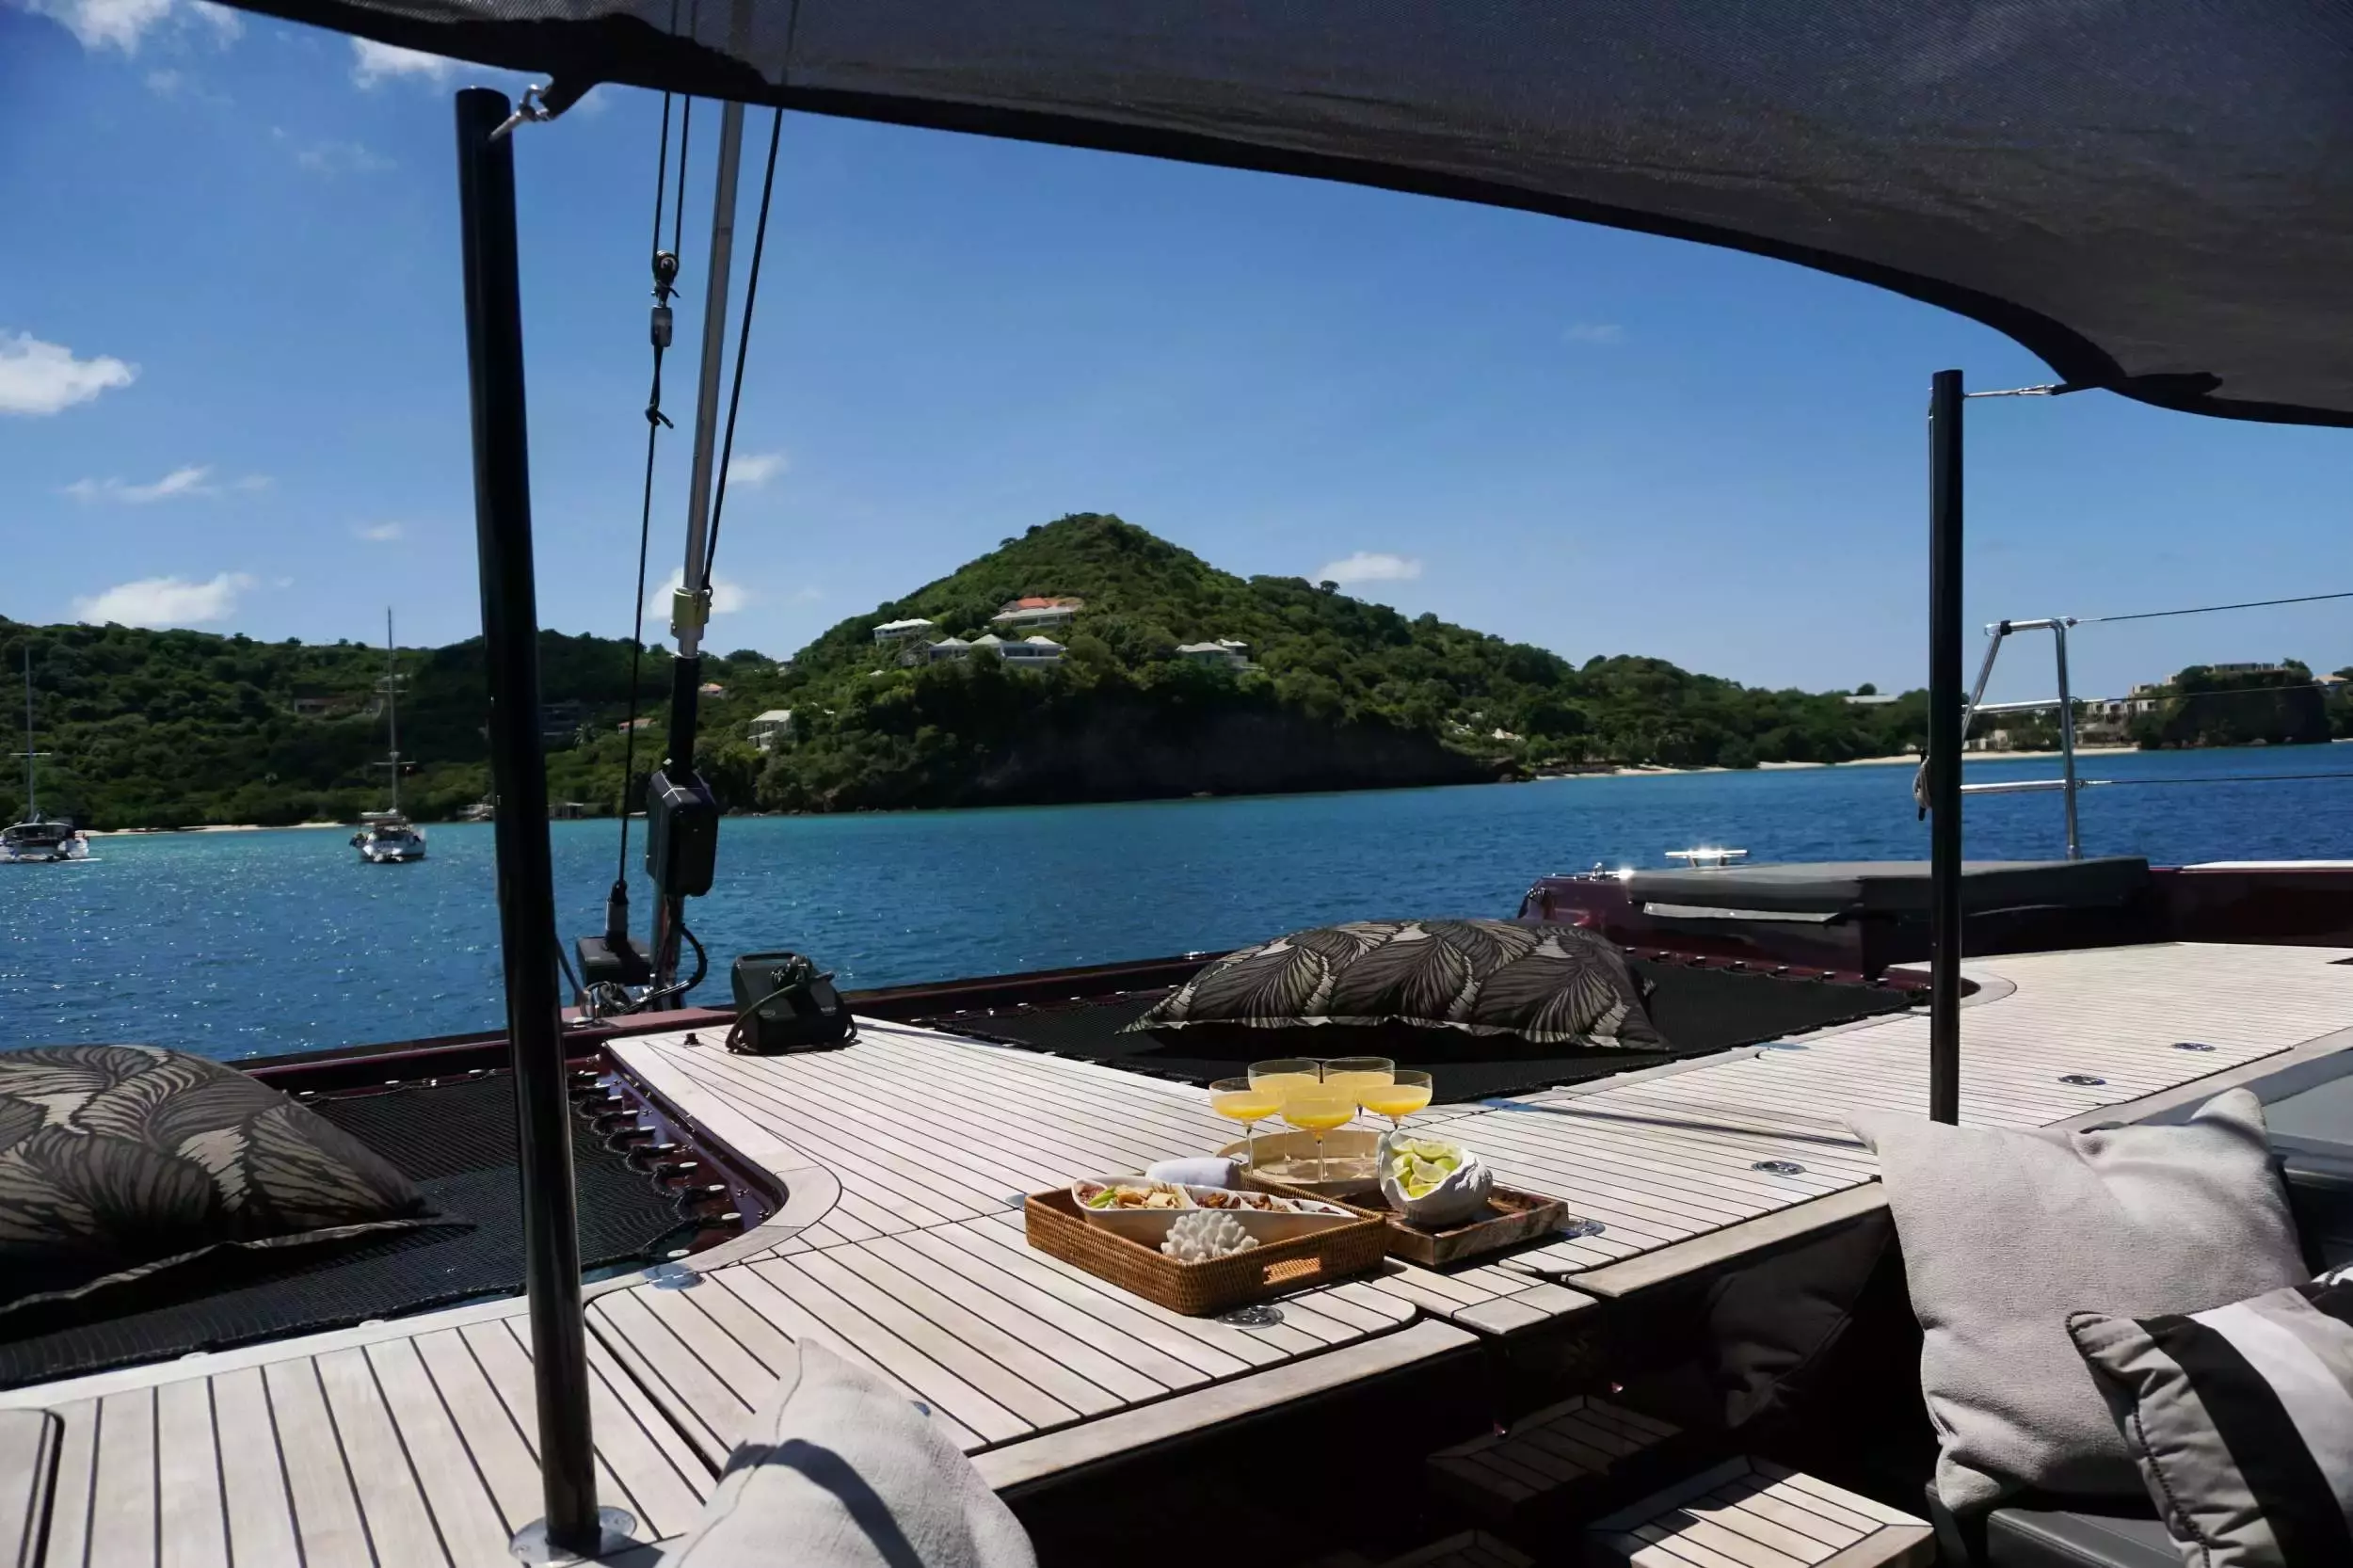 Lena by Sunreef Yachts - Top rates for a Charter of a private Luxury Catamaran in US Virgin Islands